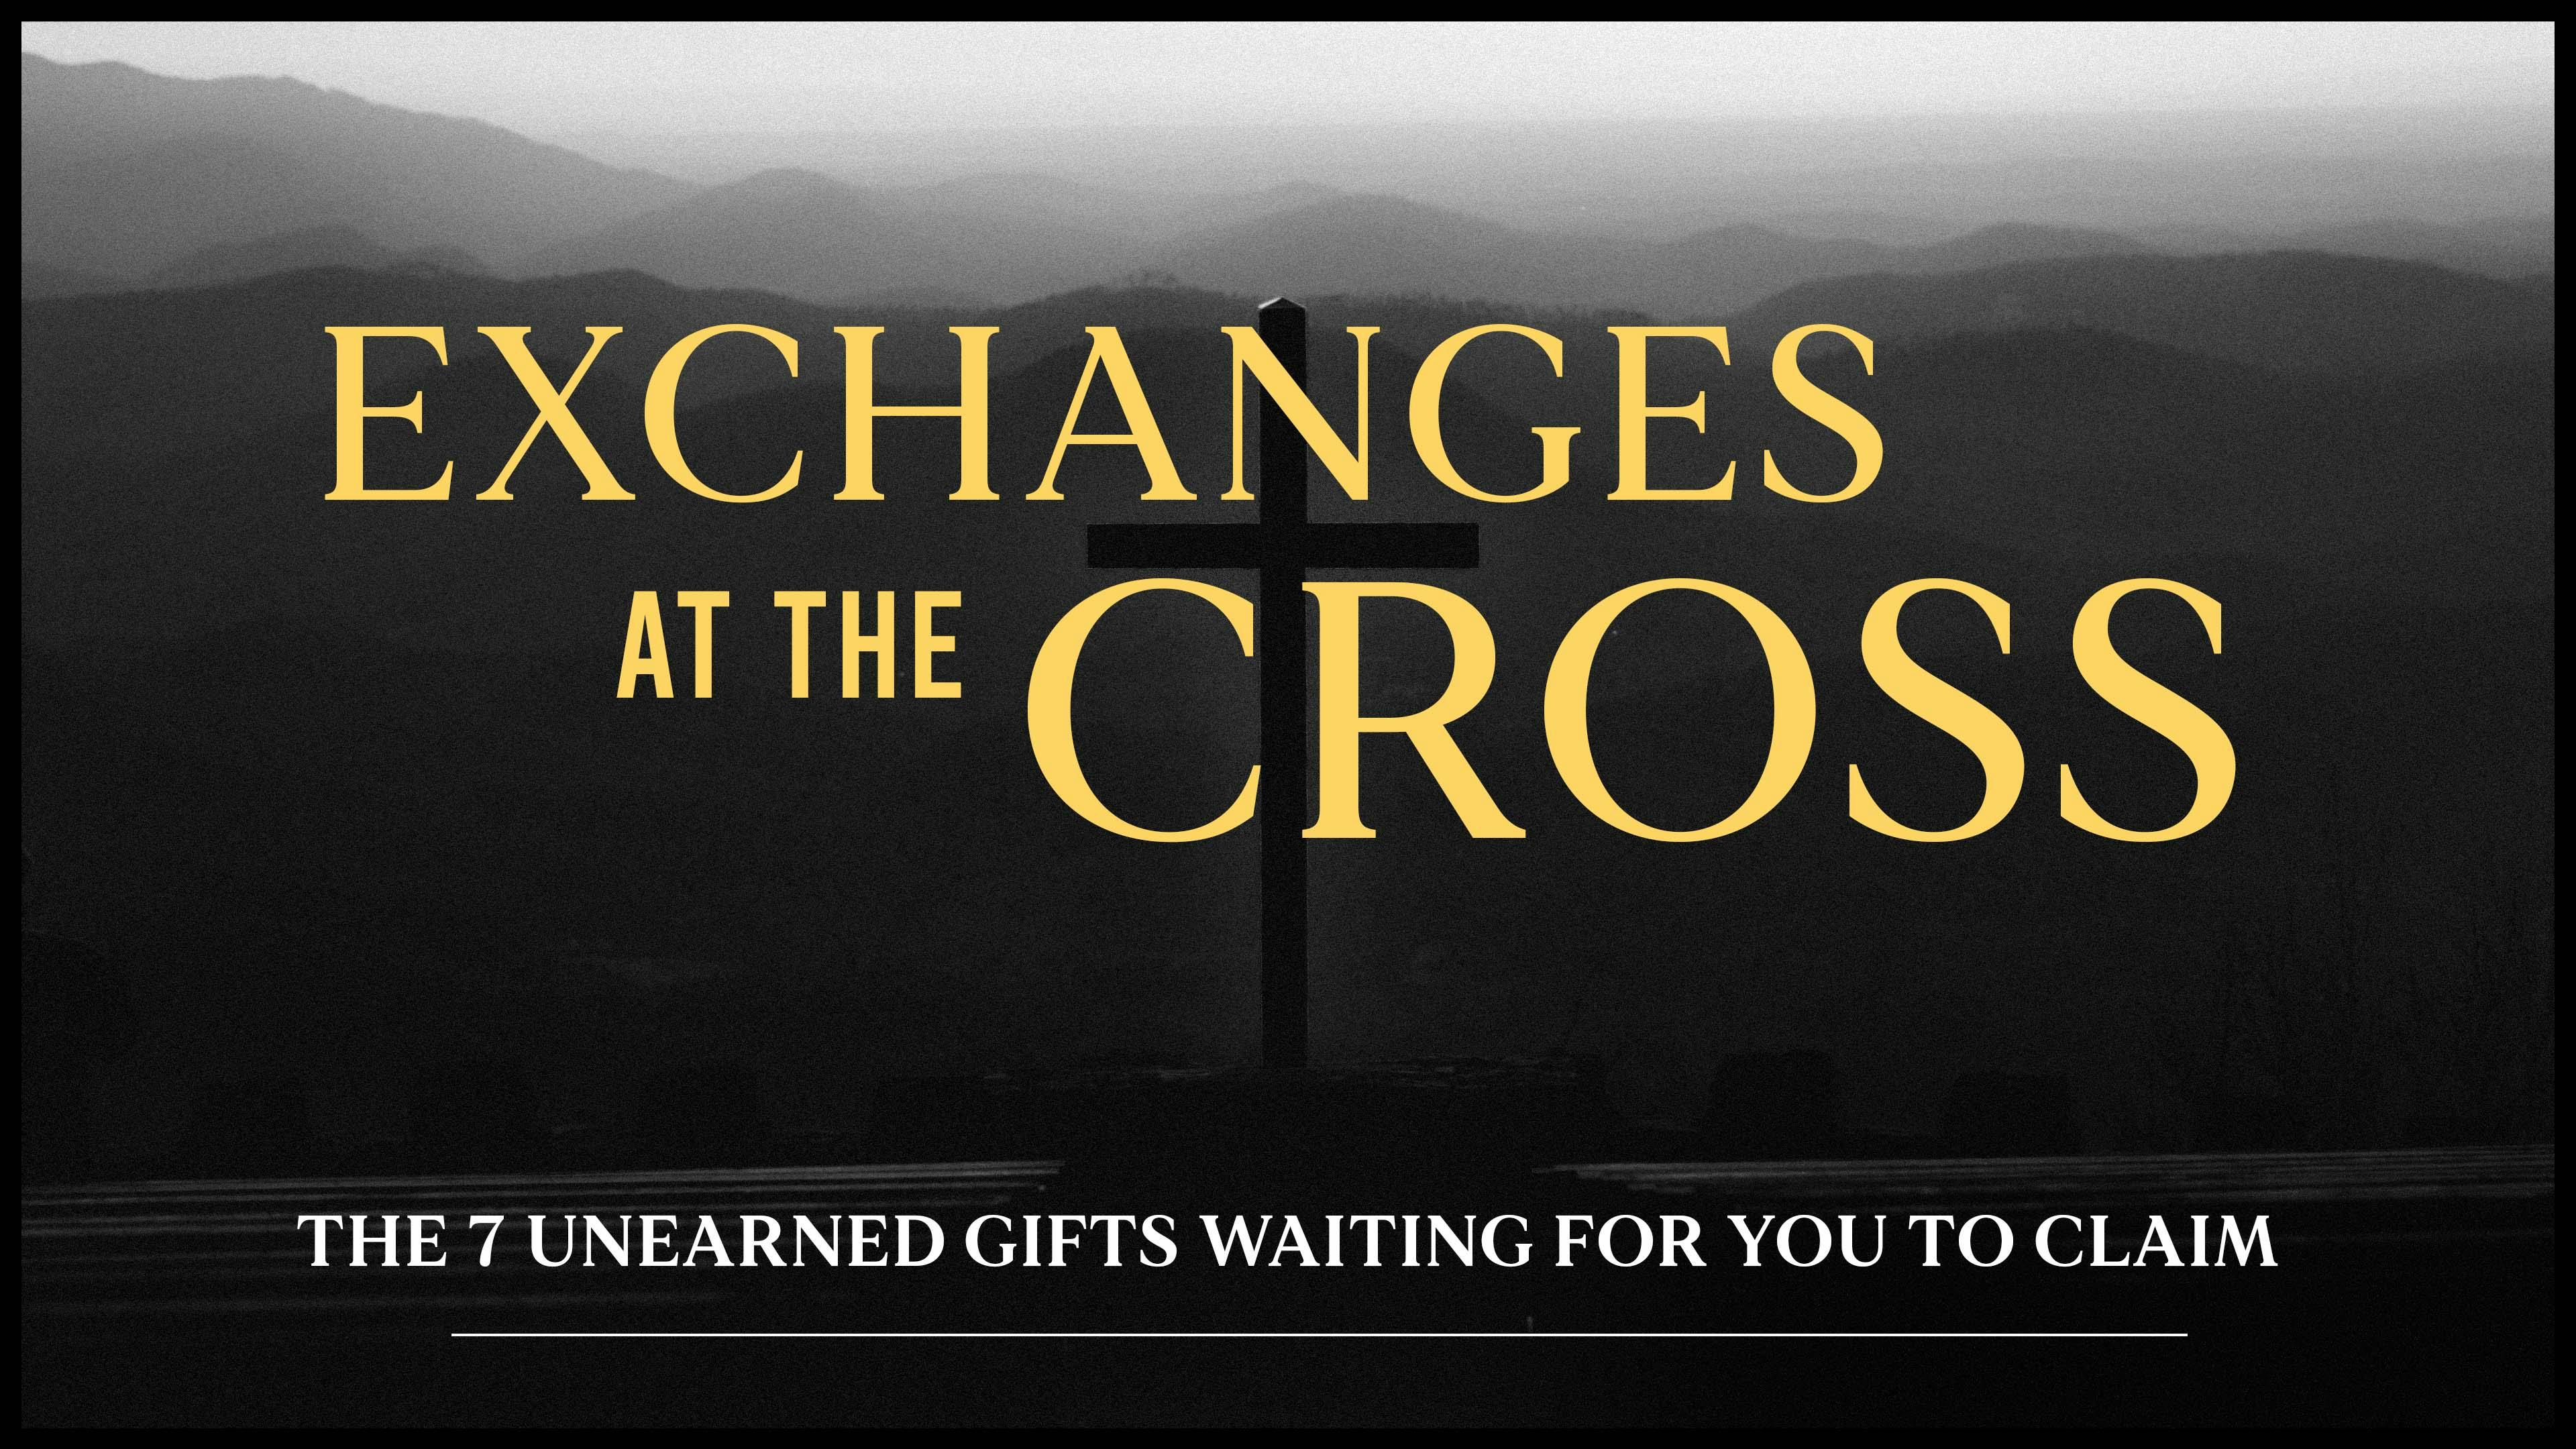 Exchanges at the Cross